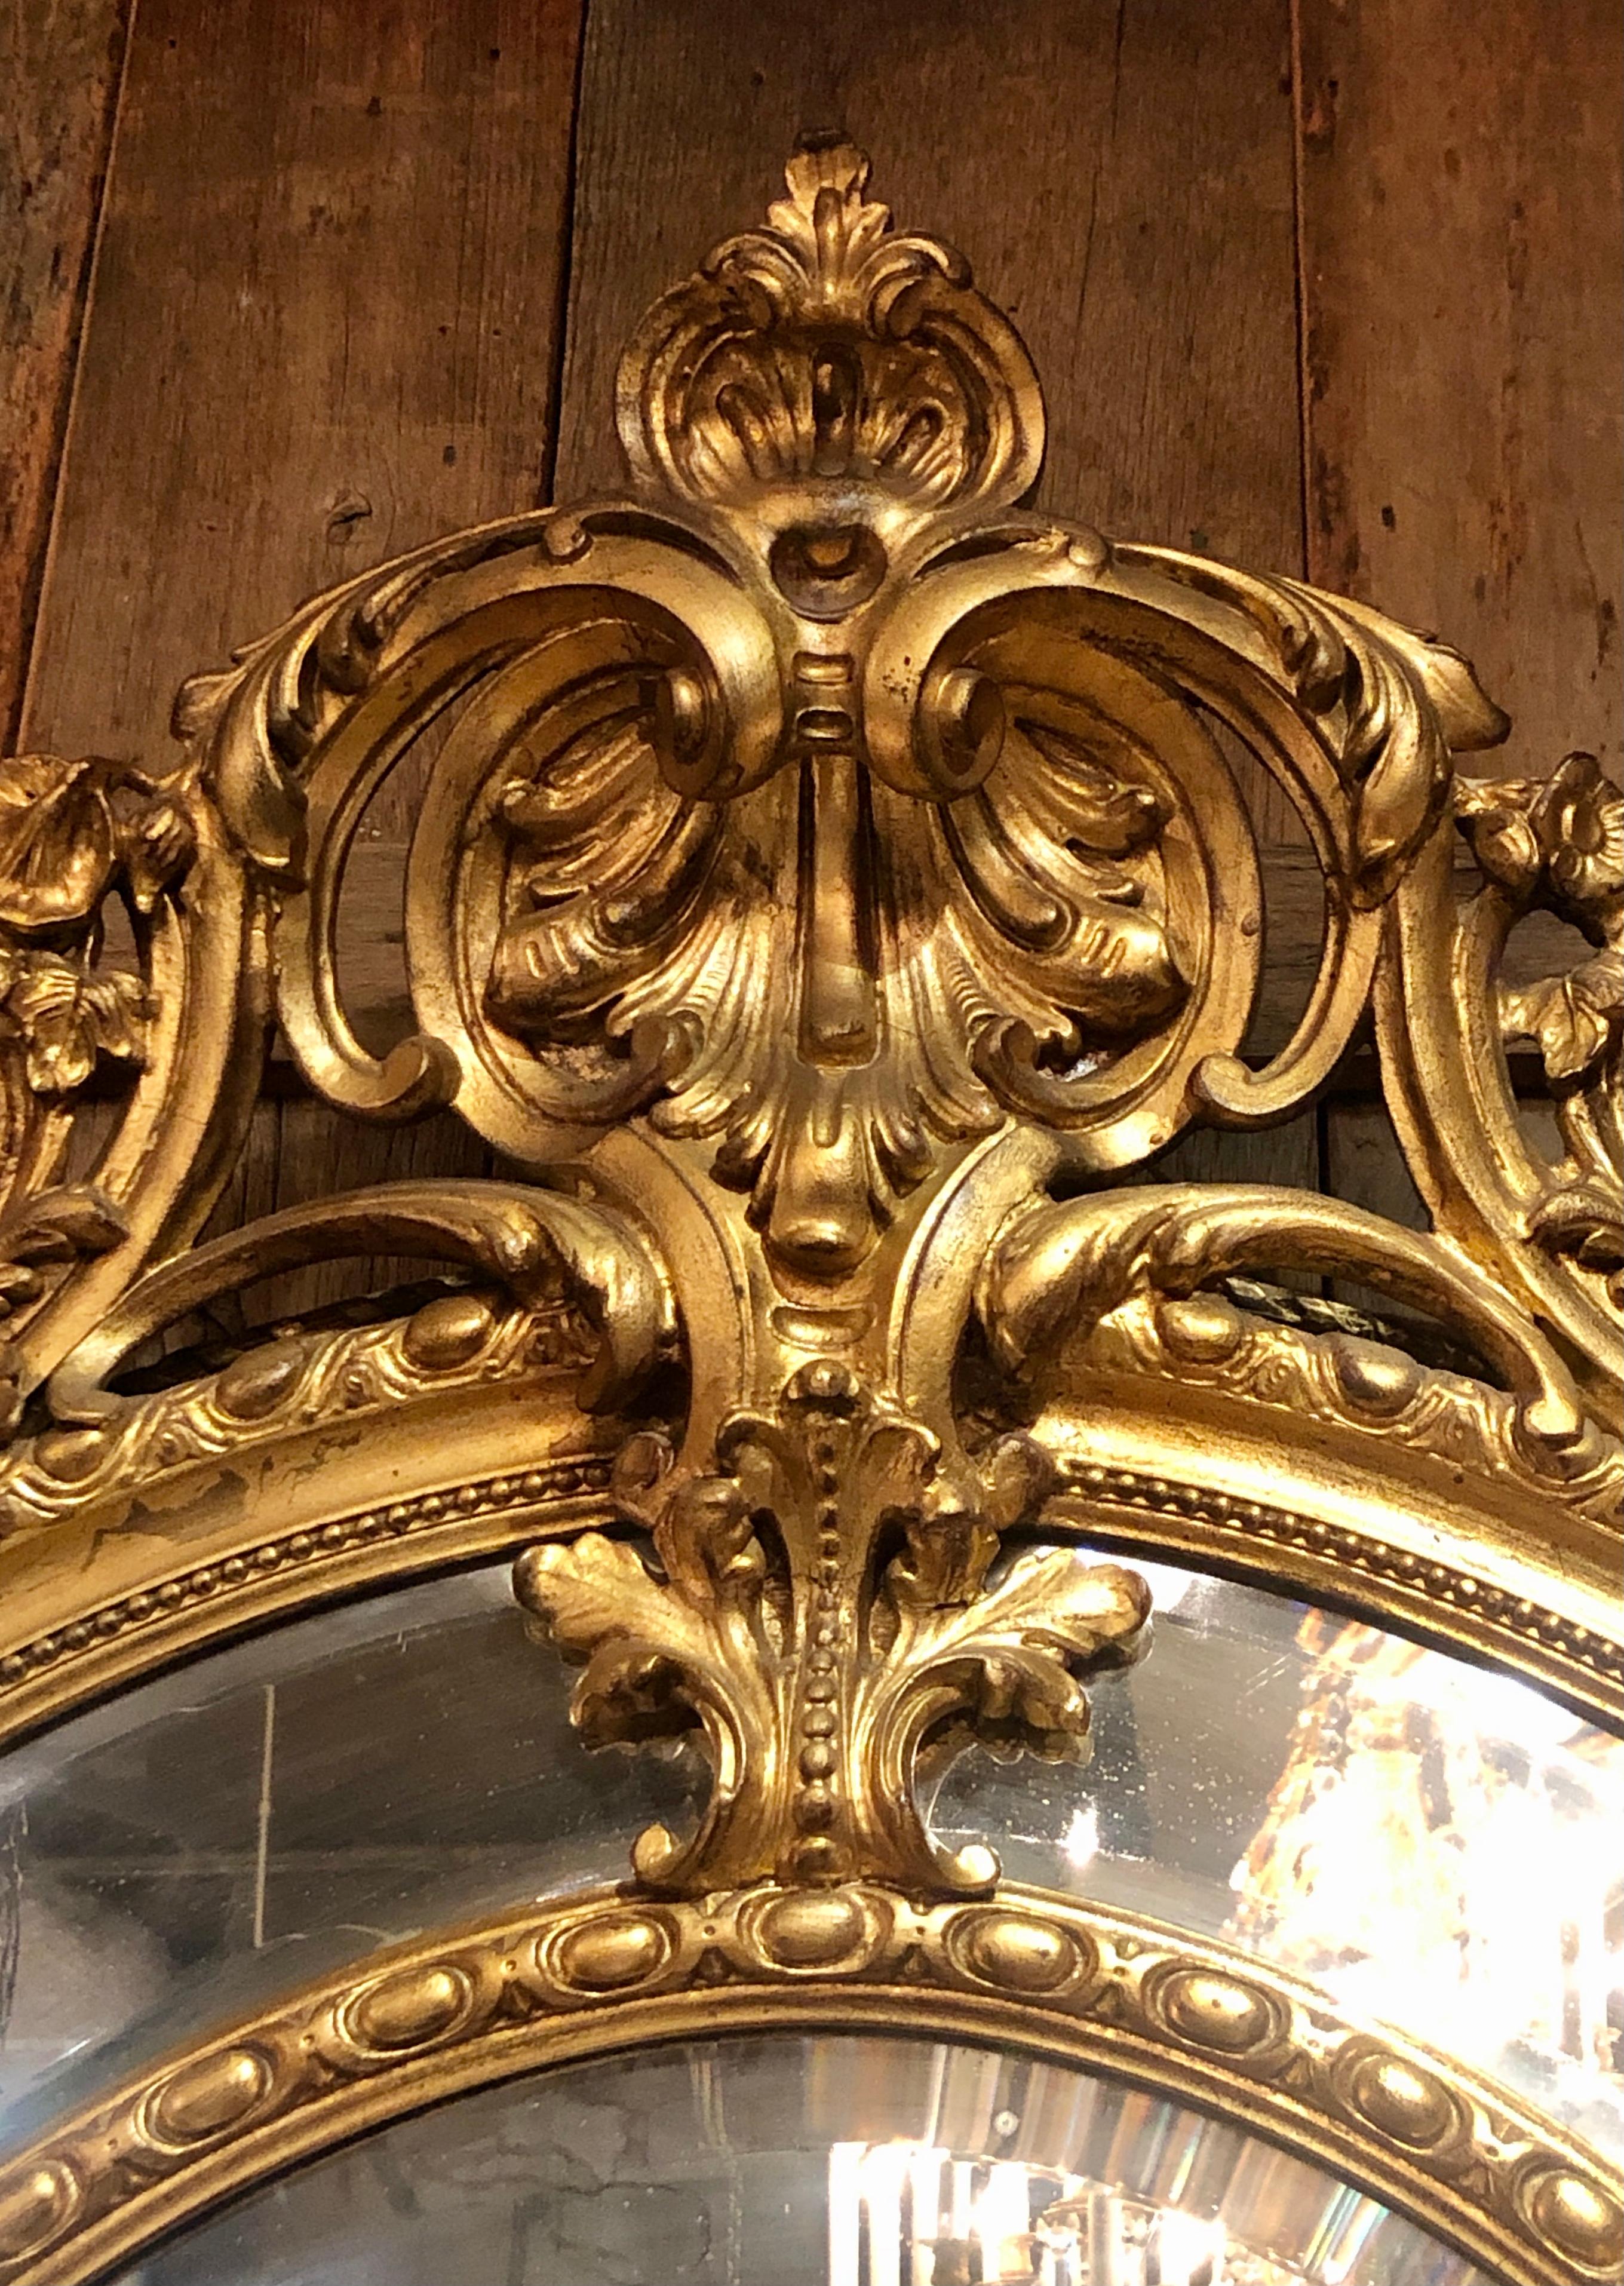 19th Century Antique French Carved Gilt Wood Oval Mirror with Beveling, circa 1870-1890